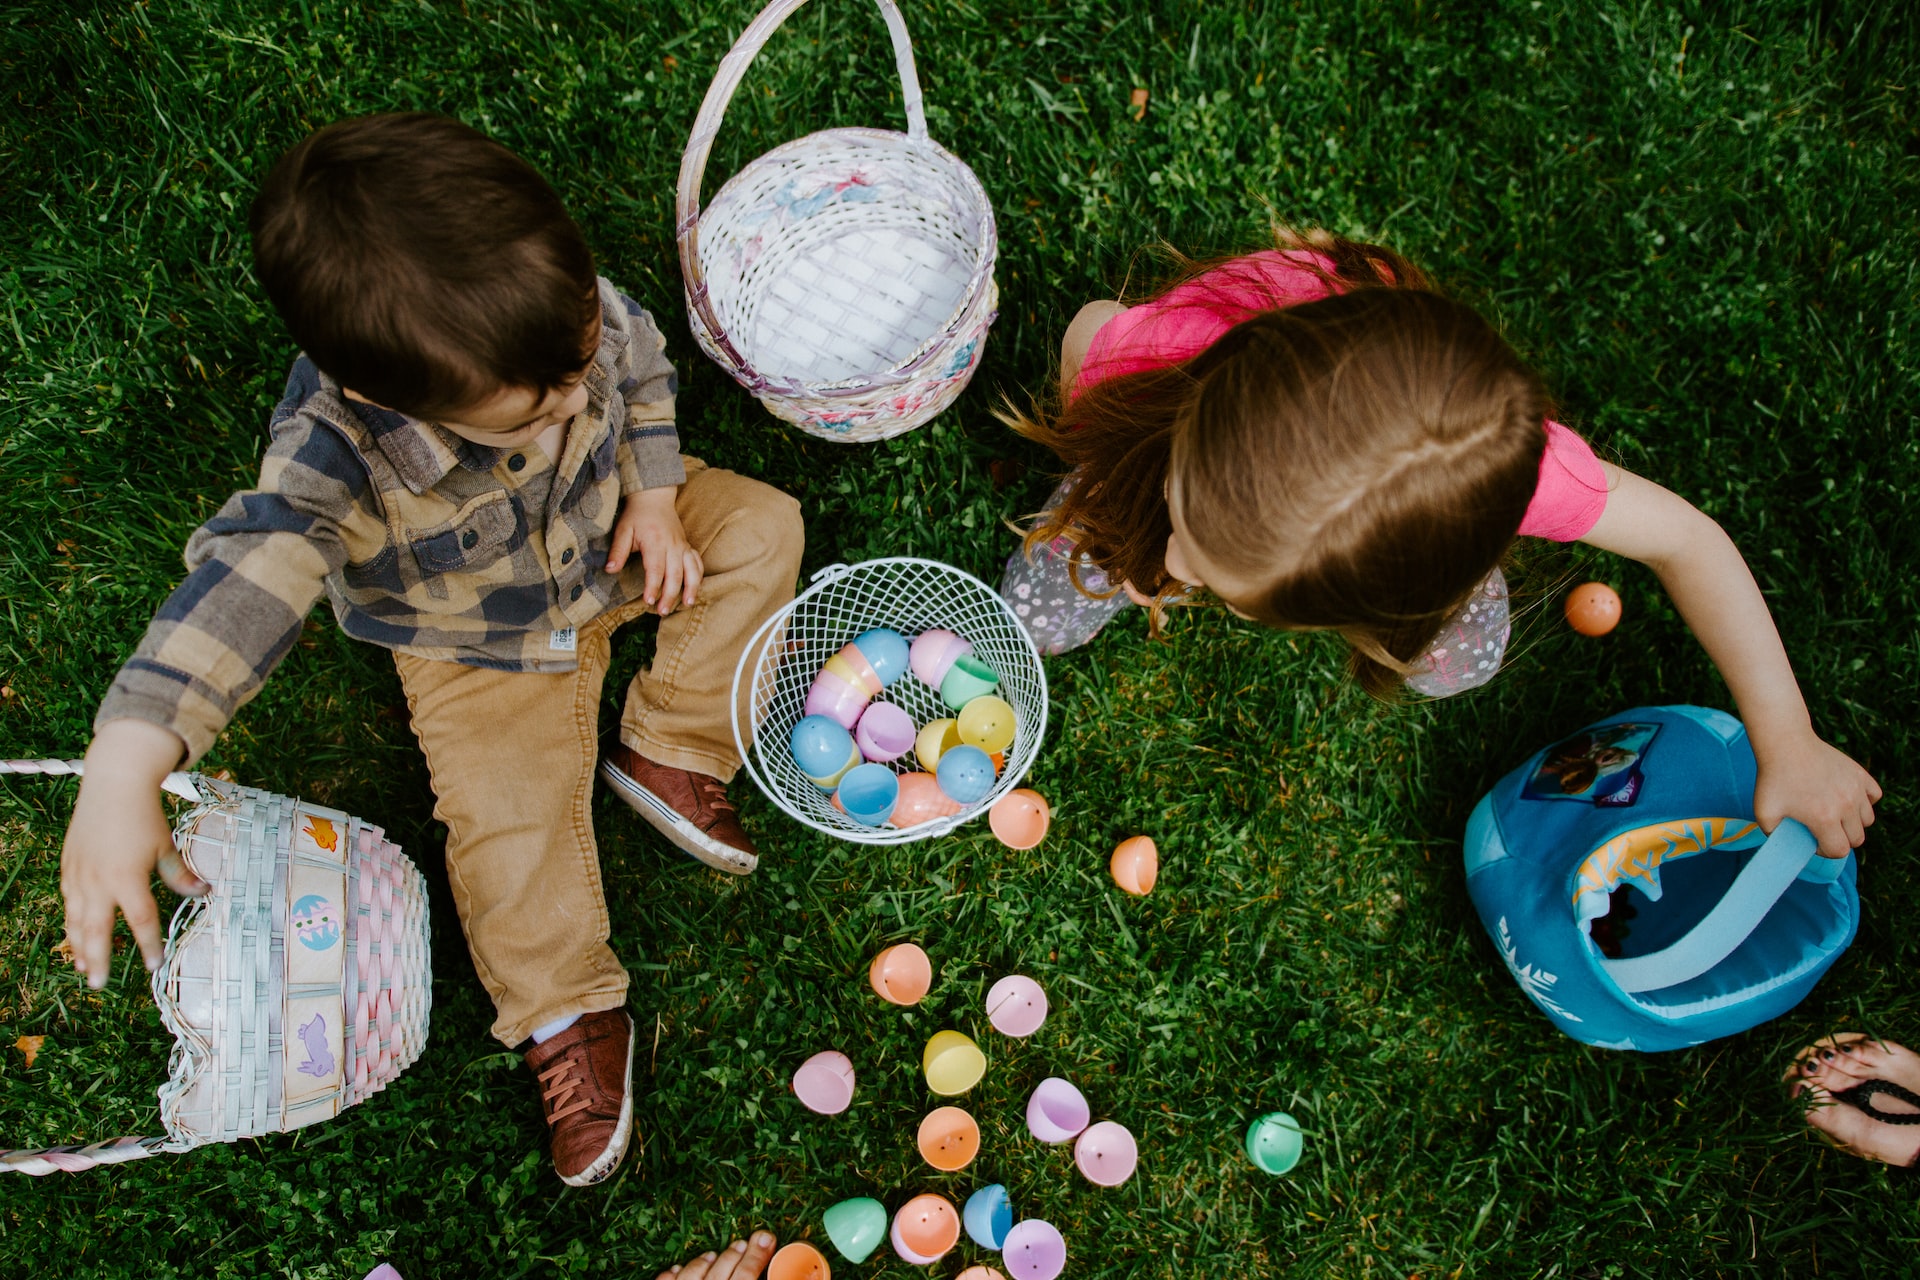 Hop into Easter with these Egg-citing Gift Ideas!